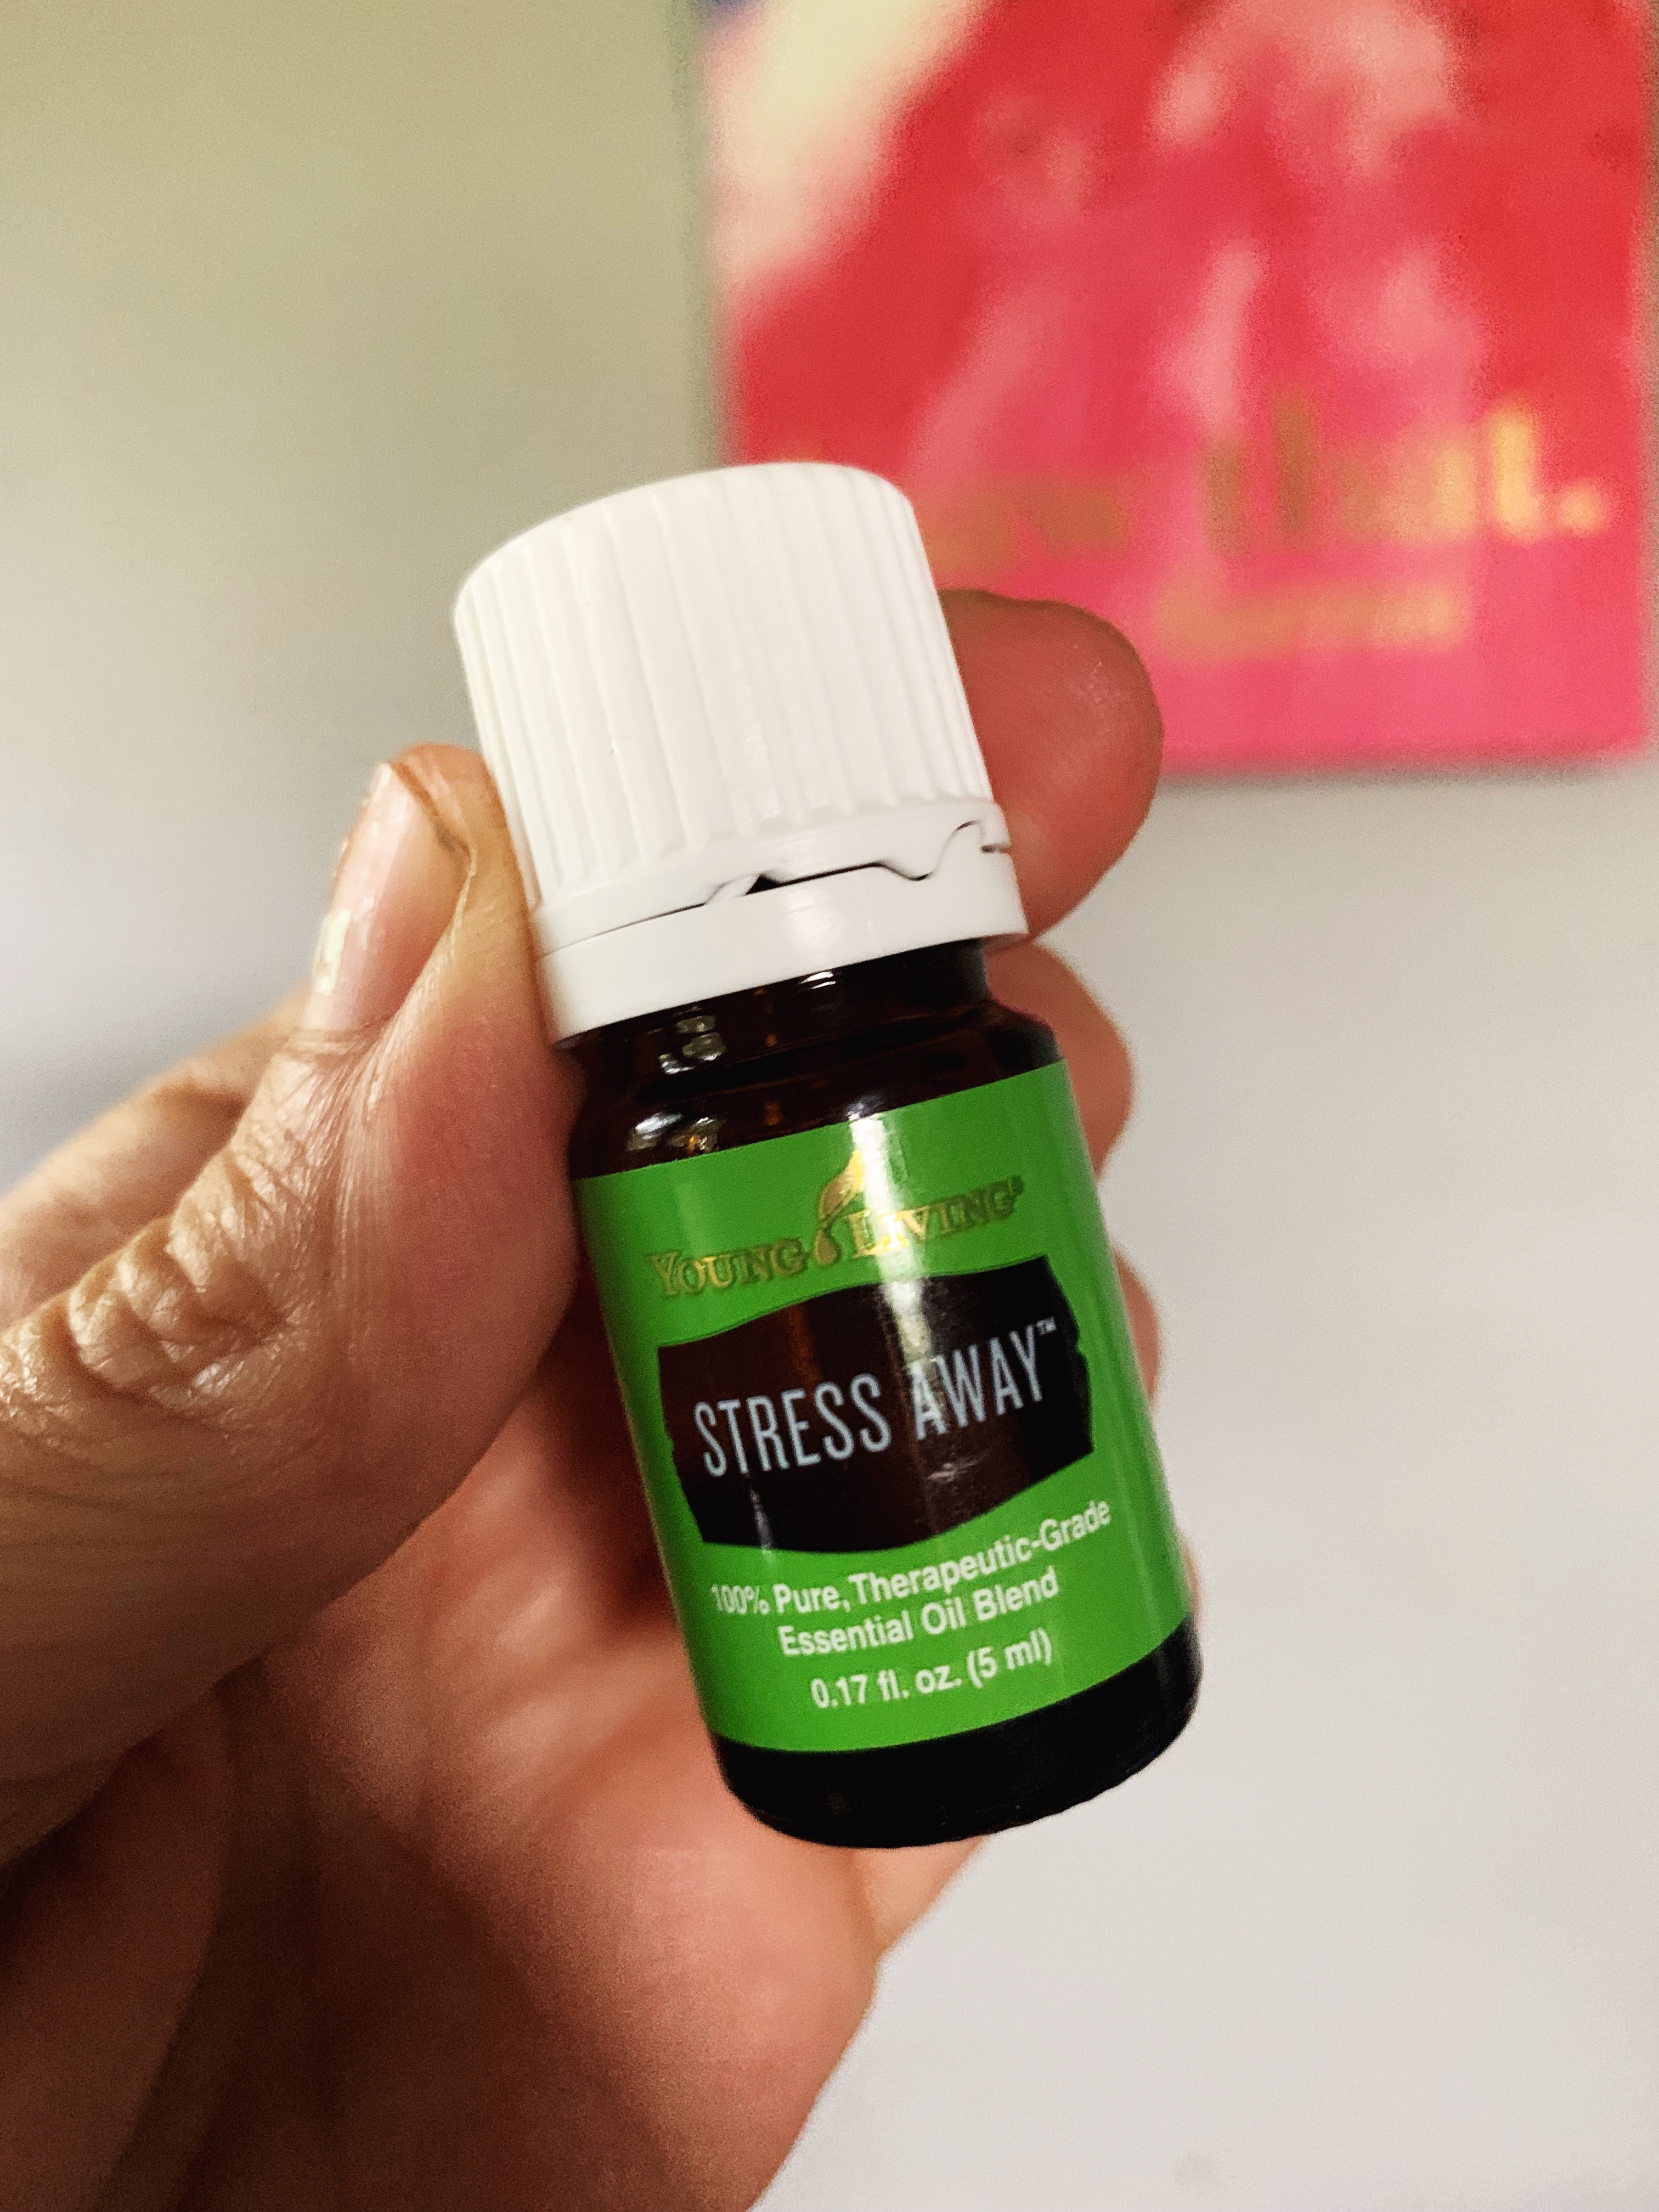 Why I am TOTALLY obsessed with essential oils